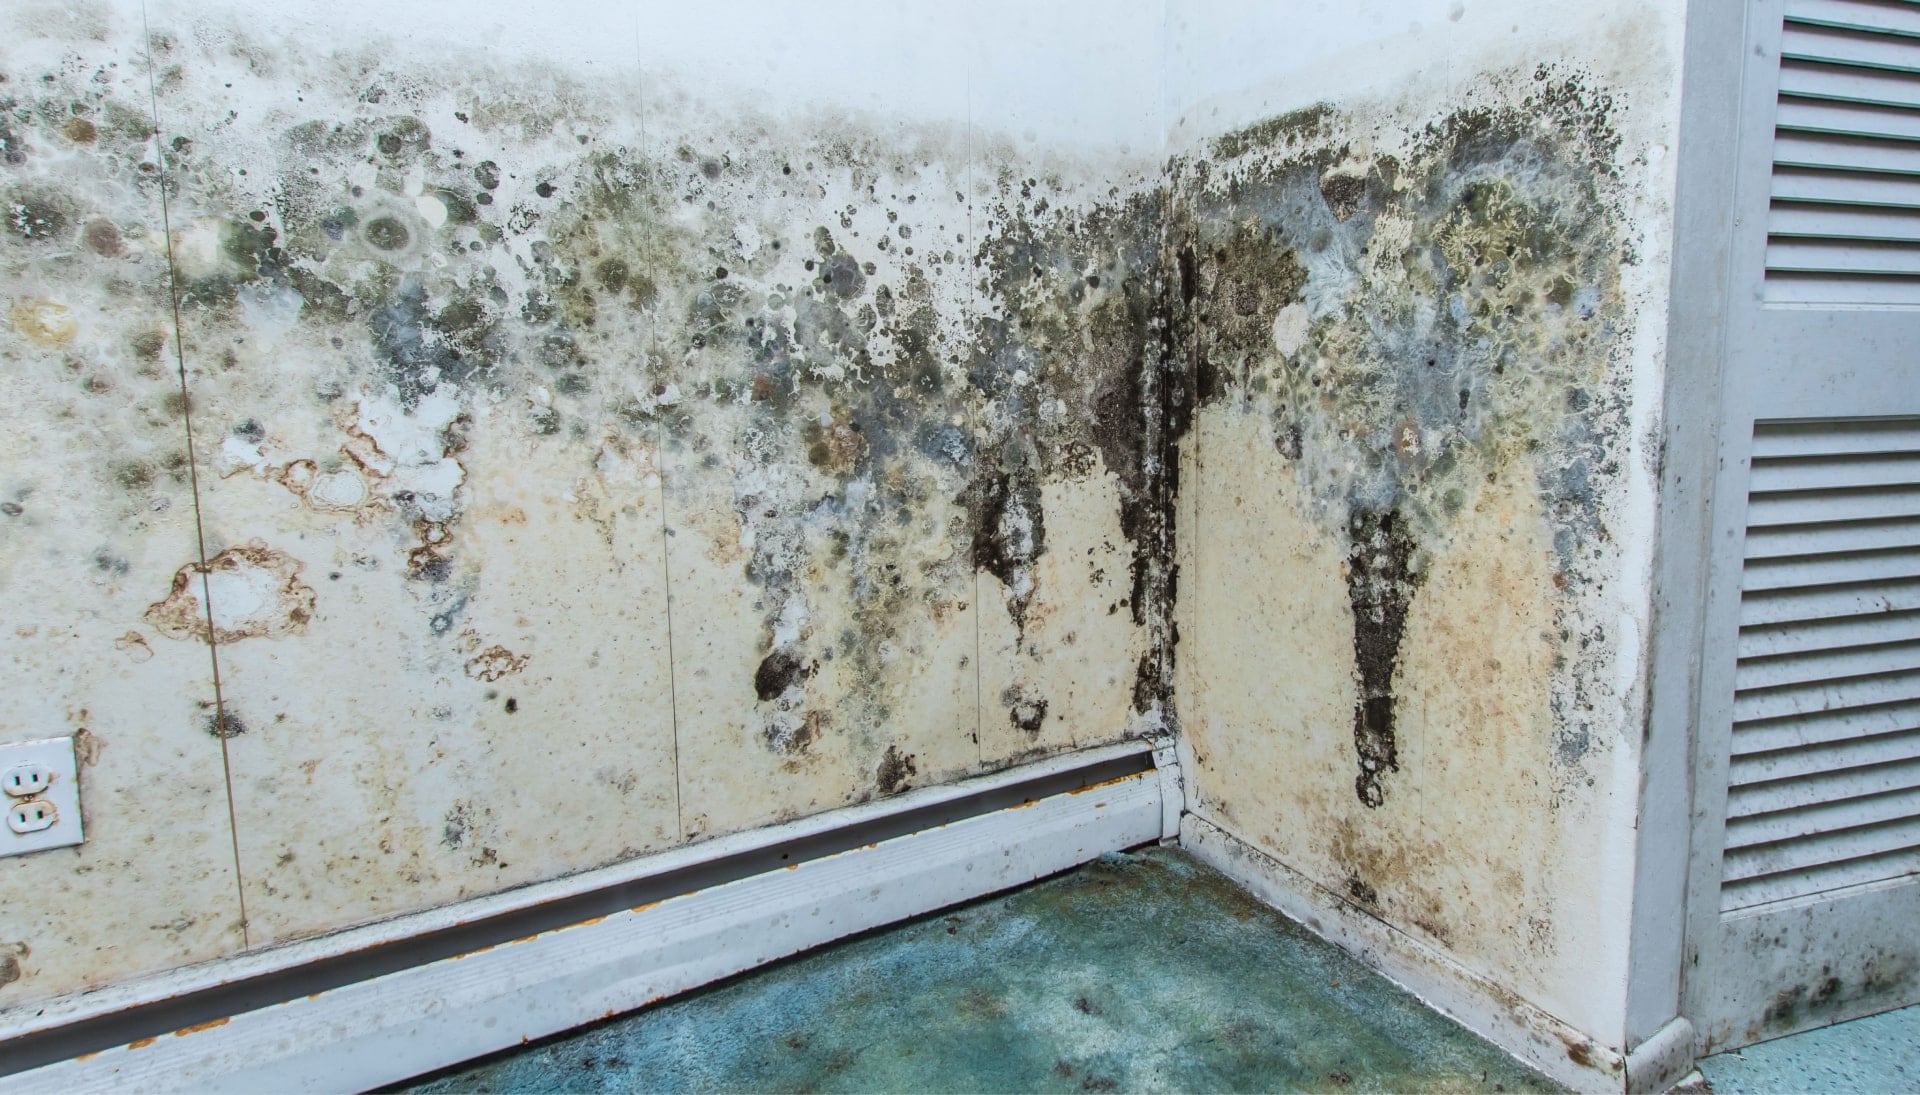 A mold remediation team using specialized techniques to remove mold damage and control odors in a Hollywood property, with a focus on safety and efficiency